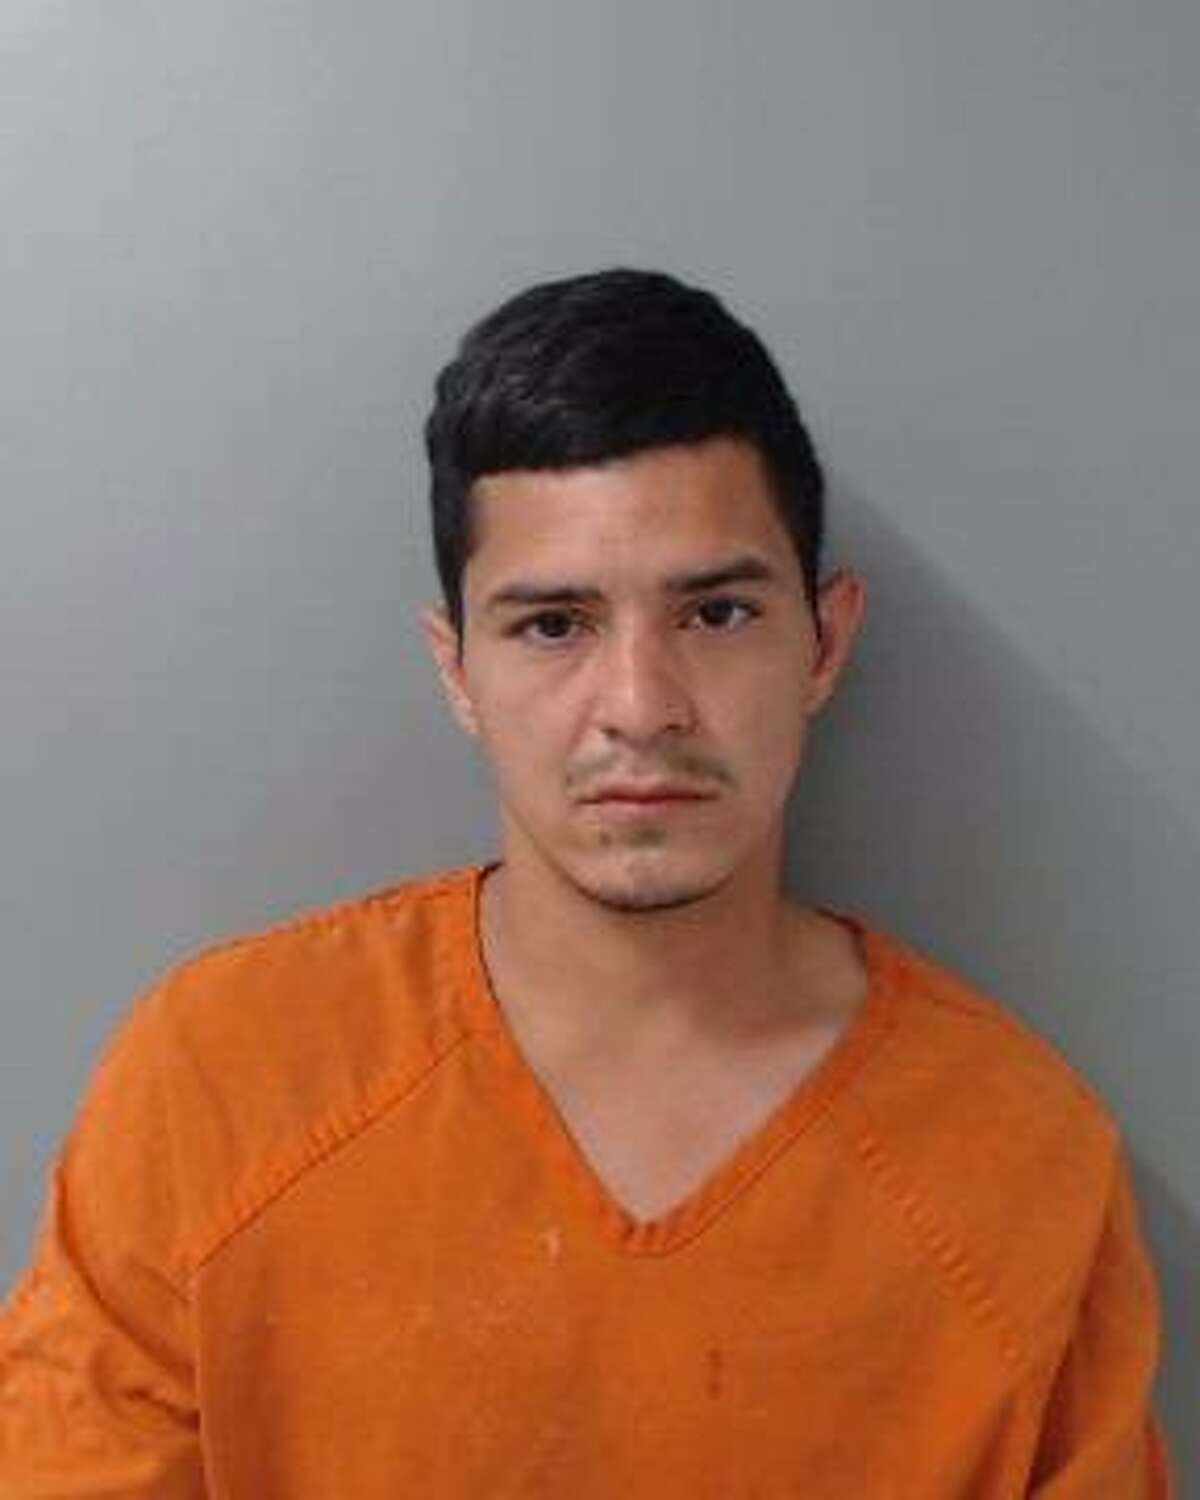 Marcos Viviano Gonzalez, 29, was arrested for allegedly threatening to kill his sister's four children -- assaulting one -- and his own mother.